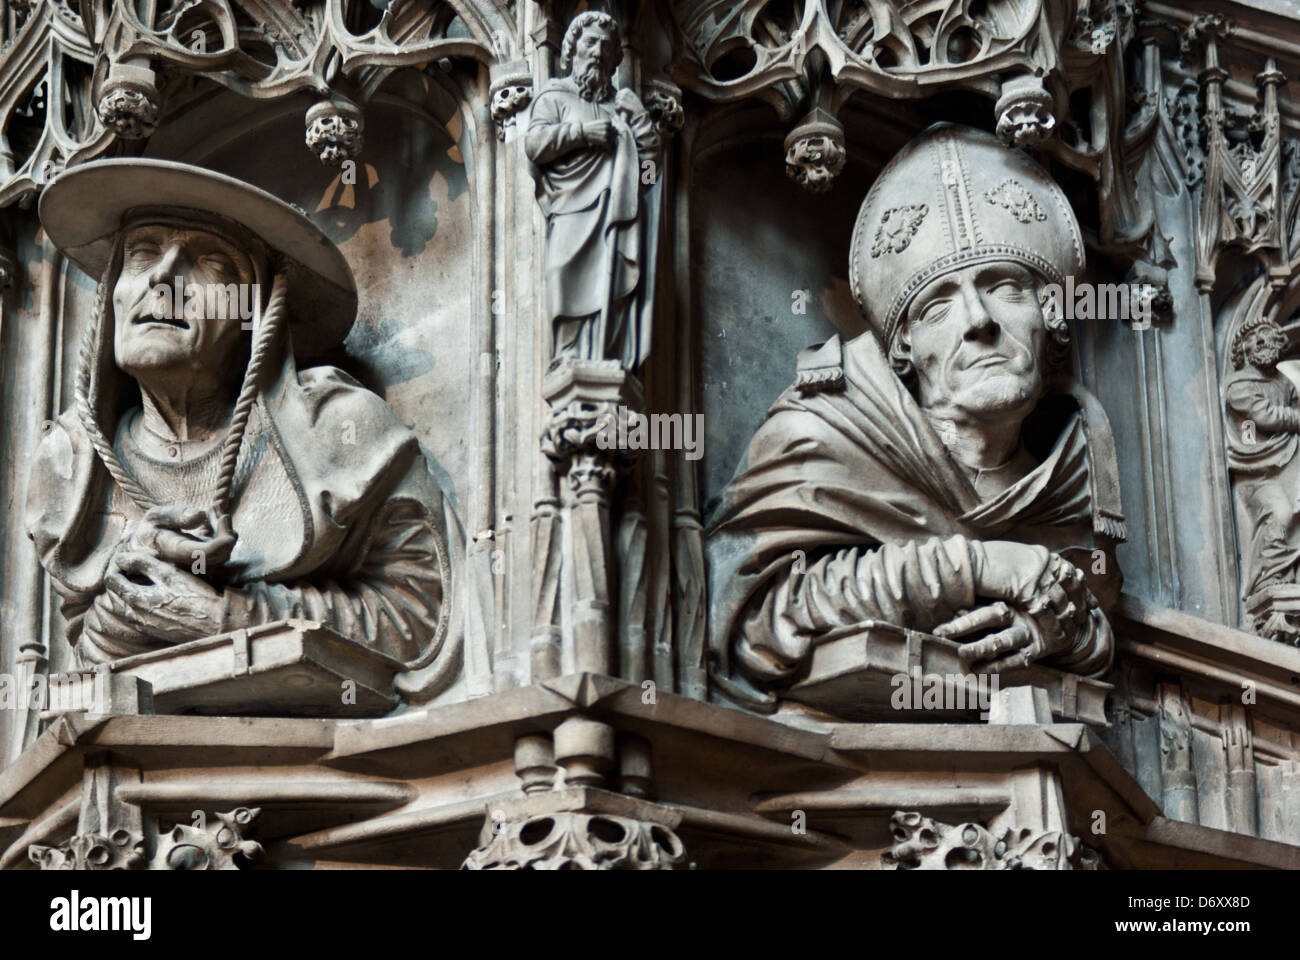 St Gerome and St Augustine of Hippo statues at the pulpitum of Stephansdom (St. Stephen's Cathedral), Vienna Stock Photo